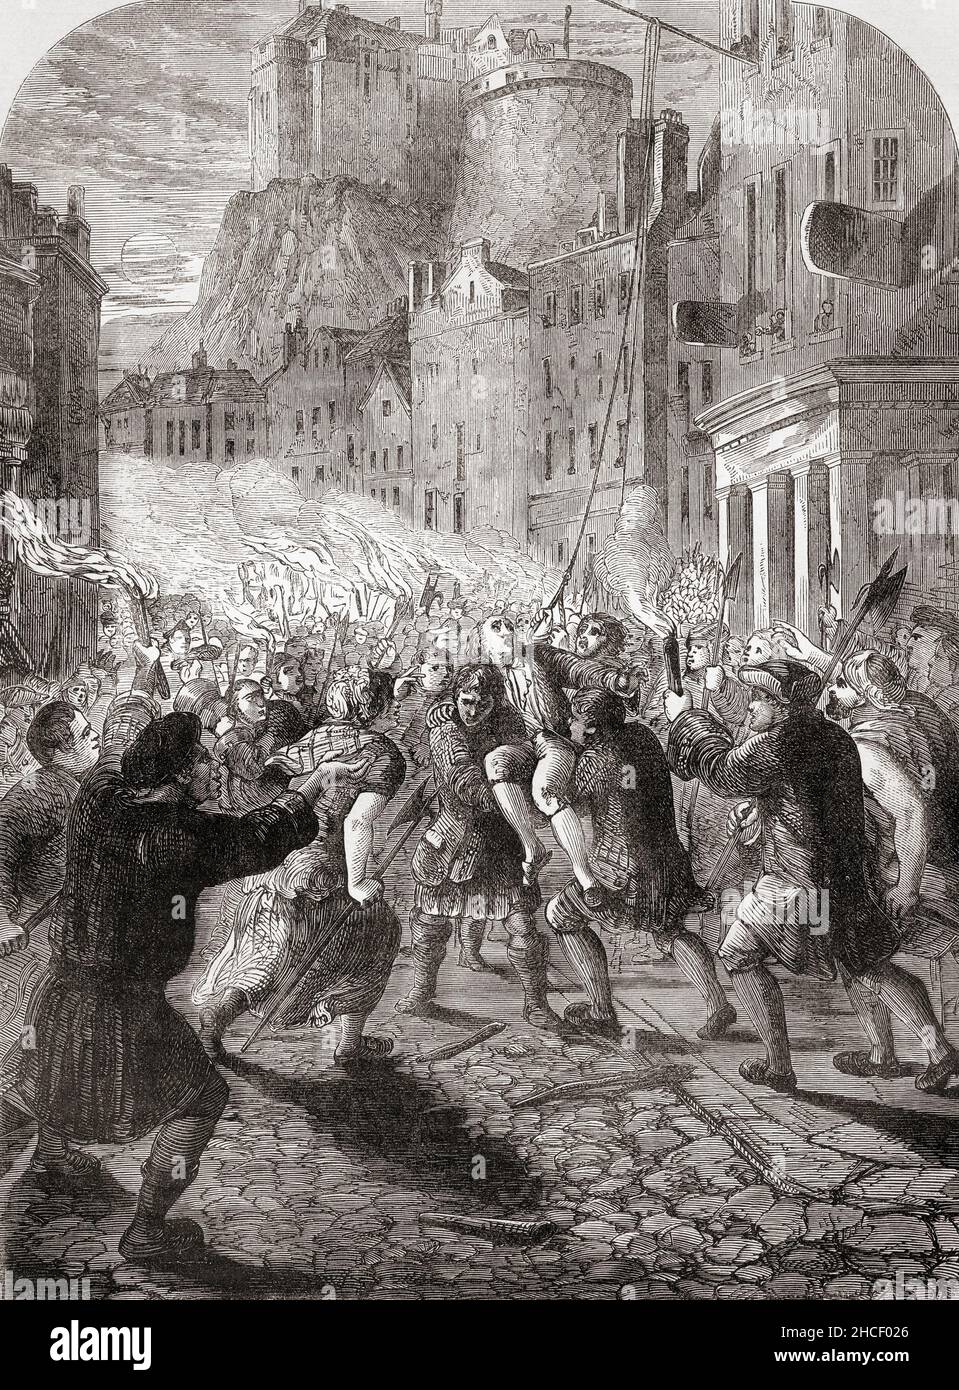 The Edinburgh mob carrying Captain Porteous to execution. Captain John Porteous, c. 1695 – 1736.  Scottish soldier and Captain of the Edinburgh City or Town Guard.  He was lynched by a mob during the Porteous Riots of 1736 for his part in the killing of innocent civilians while ordering the men under his command to quell a disturbance during a public hanging in the Grassmarket.  From Cassell's Illustrated History of England, published c.1890. Stock Photo